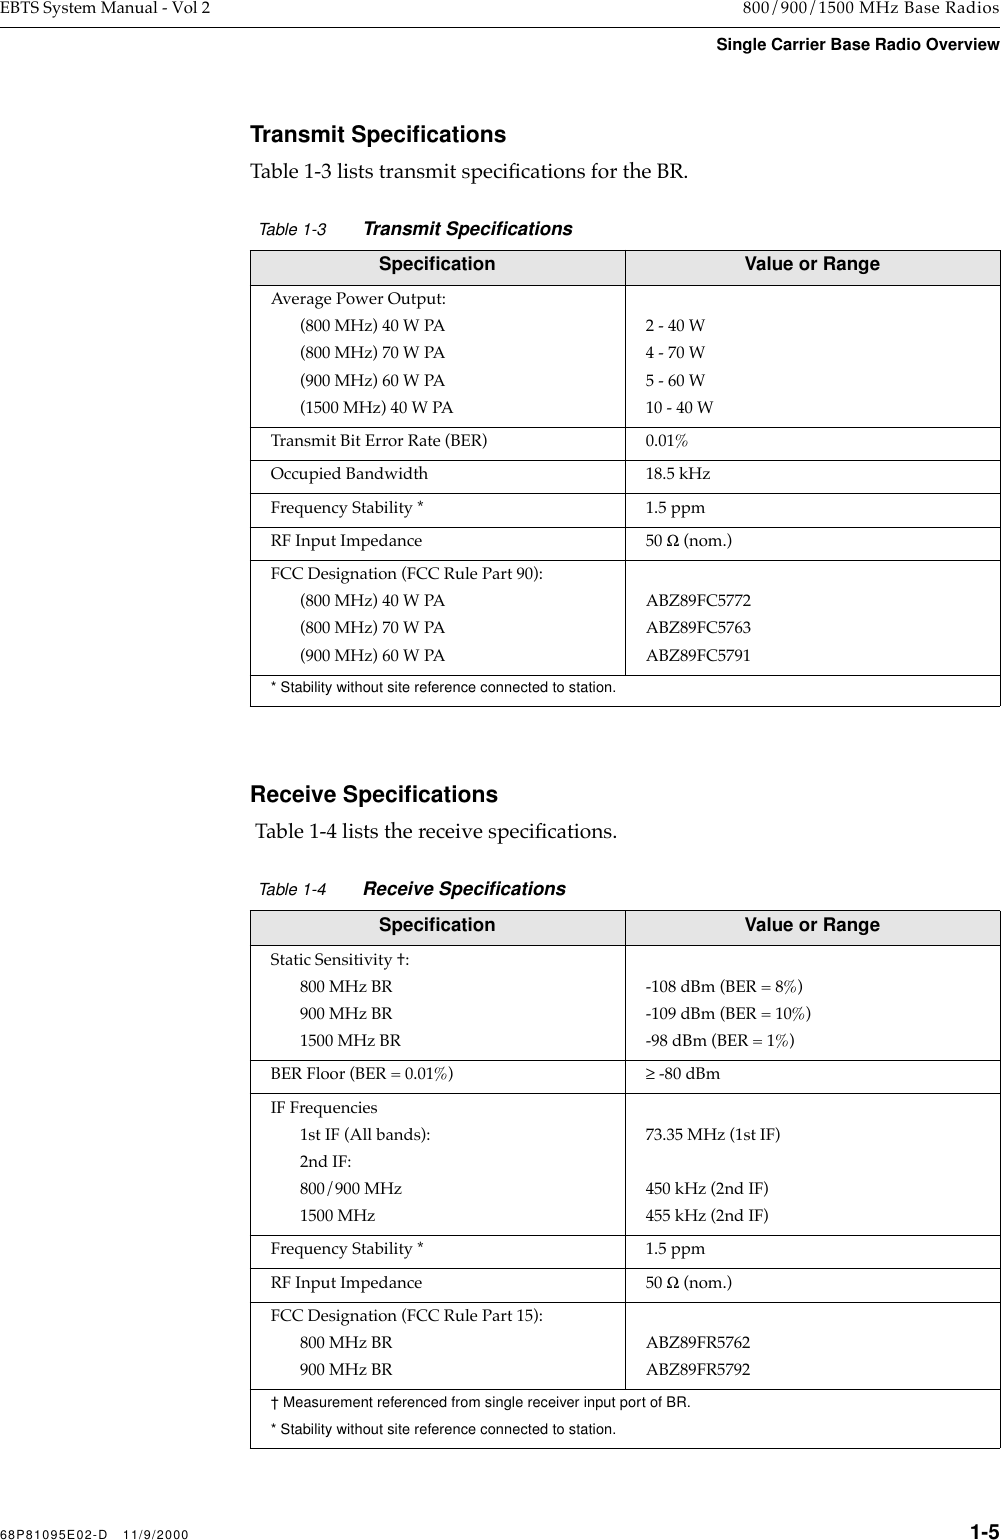  68P81095E02-D   11/9/2000 1-5 EBTS System Manual - Vol 2 800/900/1500 MHz Base Radios Single Carrier Base Radio Overview Transmit Speciﬁcations Table 1-3 lists transmit speciÞcations for the BR. Receive Speciﬁcations  Table 1-4 lists the receive speciÞcations.   Table 1-3   Transmit Speciﬁcations   Speciﬁcation Value or Range Average Power Output:(800 MHz) 40 W PA (800 MHz) 70 W PA(900 MHz) 60 W PA(1500 MHz) 40 W PA2 - 40 W4 - 70 W5 - 60 W10 - 40 WTransmit Bit Error Rate (BER) 0.01%Occupied Bandwidth 18.5 kHzFrequency Stability * 1.5 ppmRF Input Impedance 50  Ω  (nom.)FCC Designation (FCC Rule Part 90):(800 MHz) 40 W PA(800 MHz) 70 W PA(900 MHz) 60 W PA ABZ89FC5772ABZ89FC5763ABZ89FC5791 * Stability without site reference connected to station. Table 1-4   Receive Speciﬁcations  Speciﬁcation Value or Range Static Sensitivity  :800 MHz BR 900 MHz BR 1500 MHz BR-108 dBm (BER = 8%)-109 dBm (BER = 10%)-98 dBm (BER = 1%) BER Floor (BER = 0.01%) ≥  -80 dBmIF Frequencies1st IF (All bands):2nd IF:800/900 MHz 1500 MHz73.35 MHz (1st IF)450 kHz (2nd IF)455 kHz (2nd IF)Frequency Stability * 1.5 ppmRF Input Impedance 50  Ω  (nom.)FCC Designation (FCC Rule Part 15):800 MHz BR 900 MHz BRABZ89FR5762ABZ89FR5792 † Measurement referenced from single receiver input port of BR.* Stability without site reference connected to station.